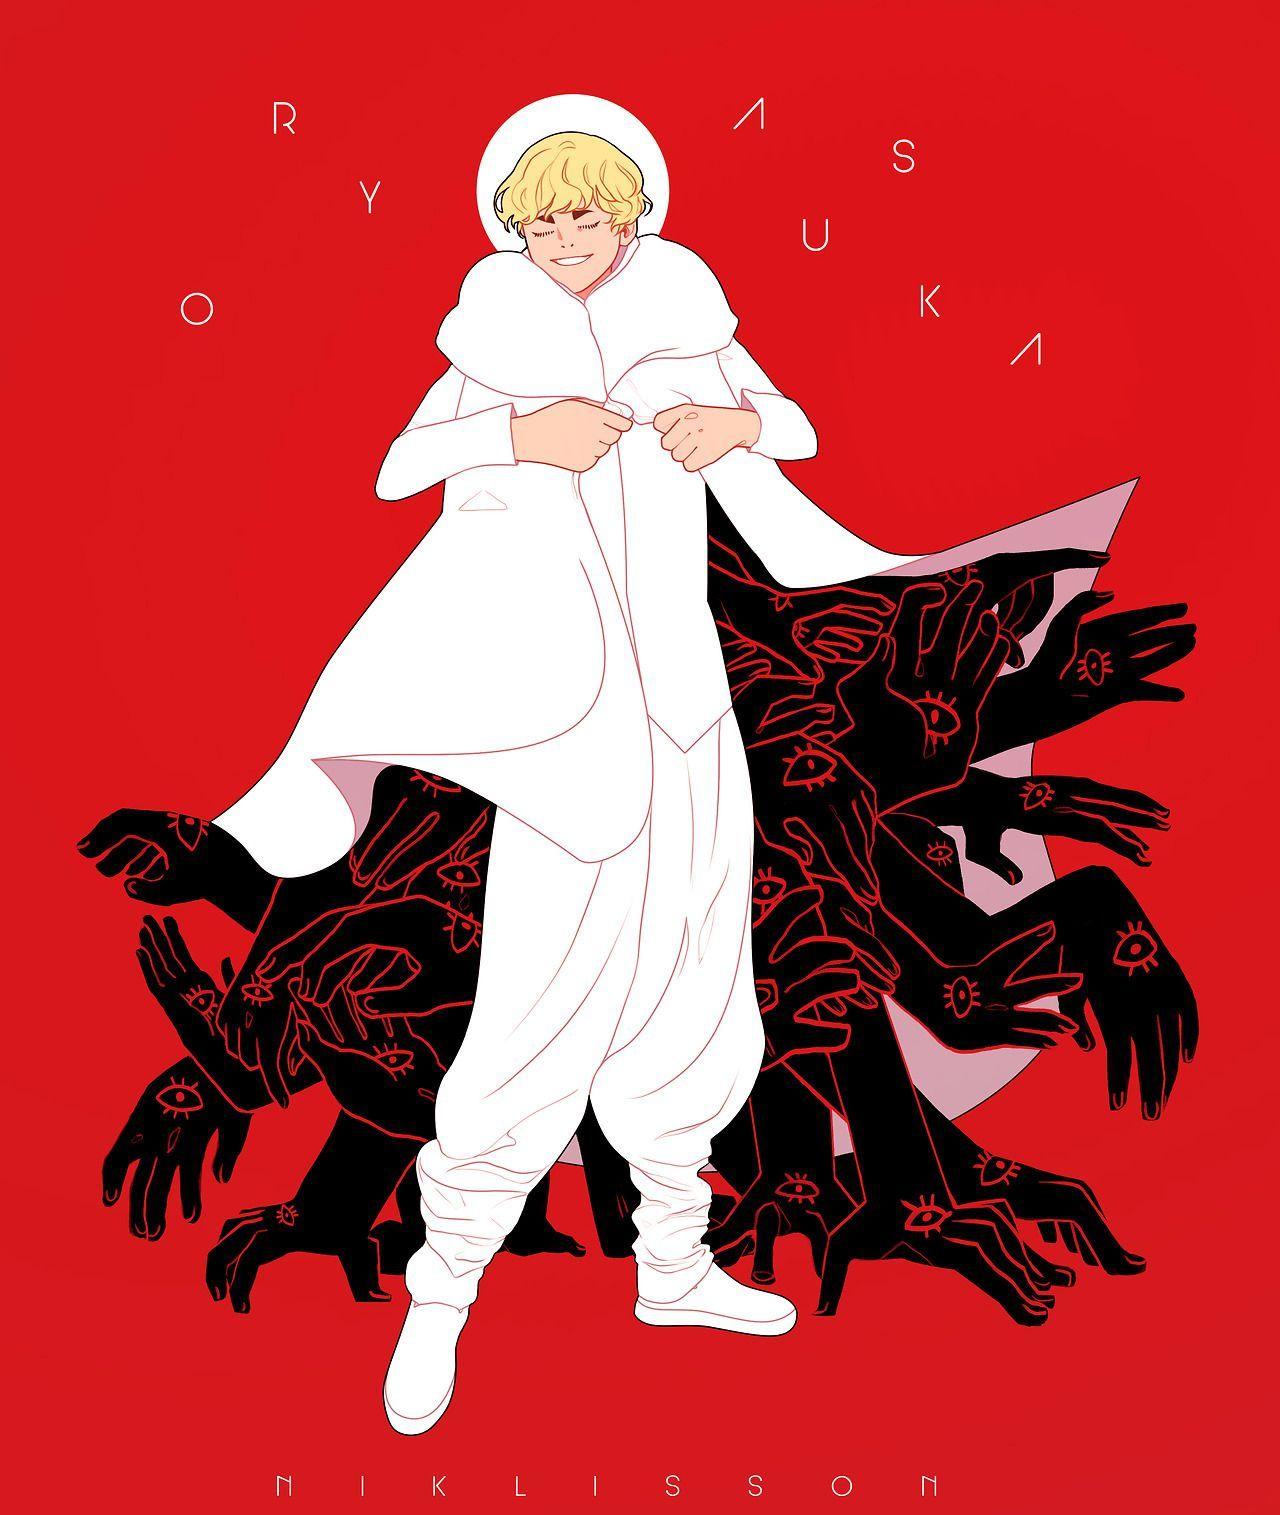 Guess Who Just Binge Watched Devilman Crybaby? Also, Thanks For 11K